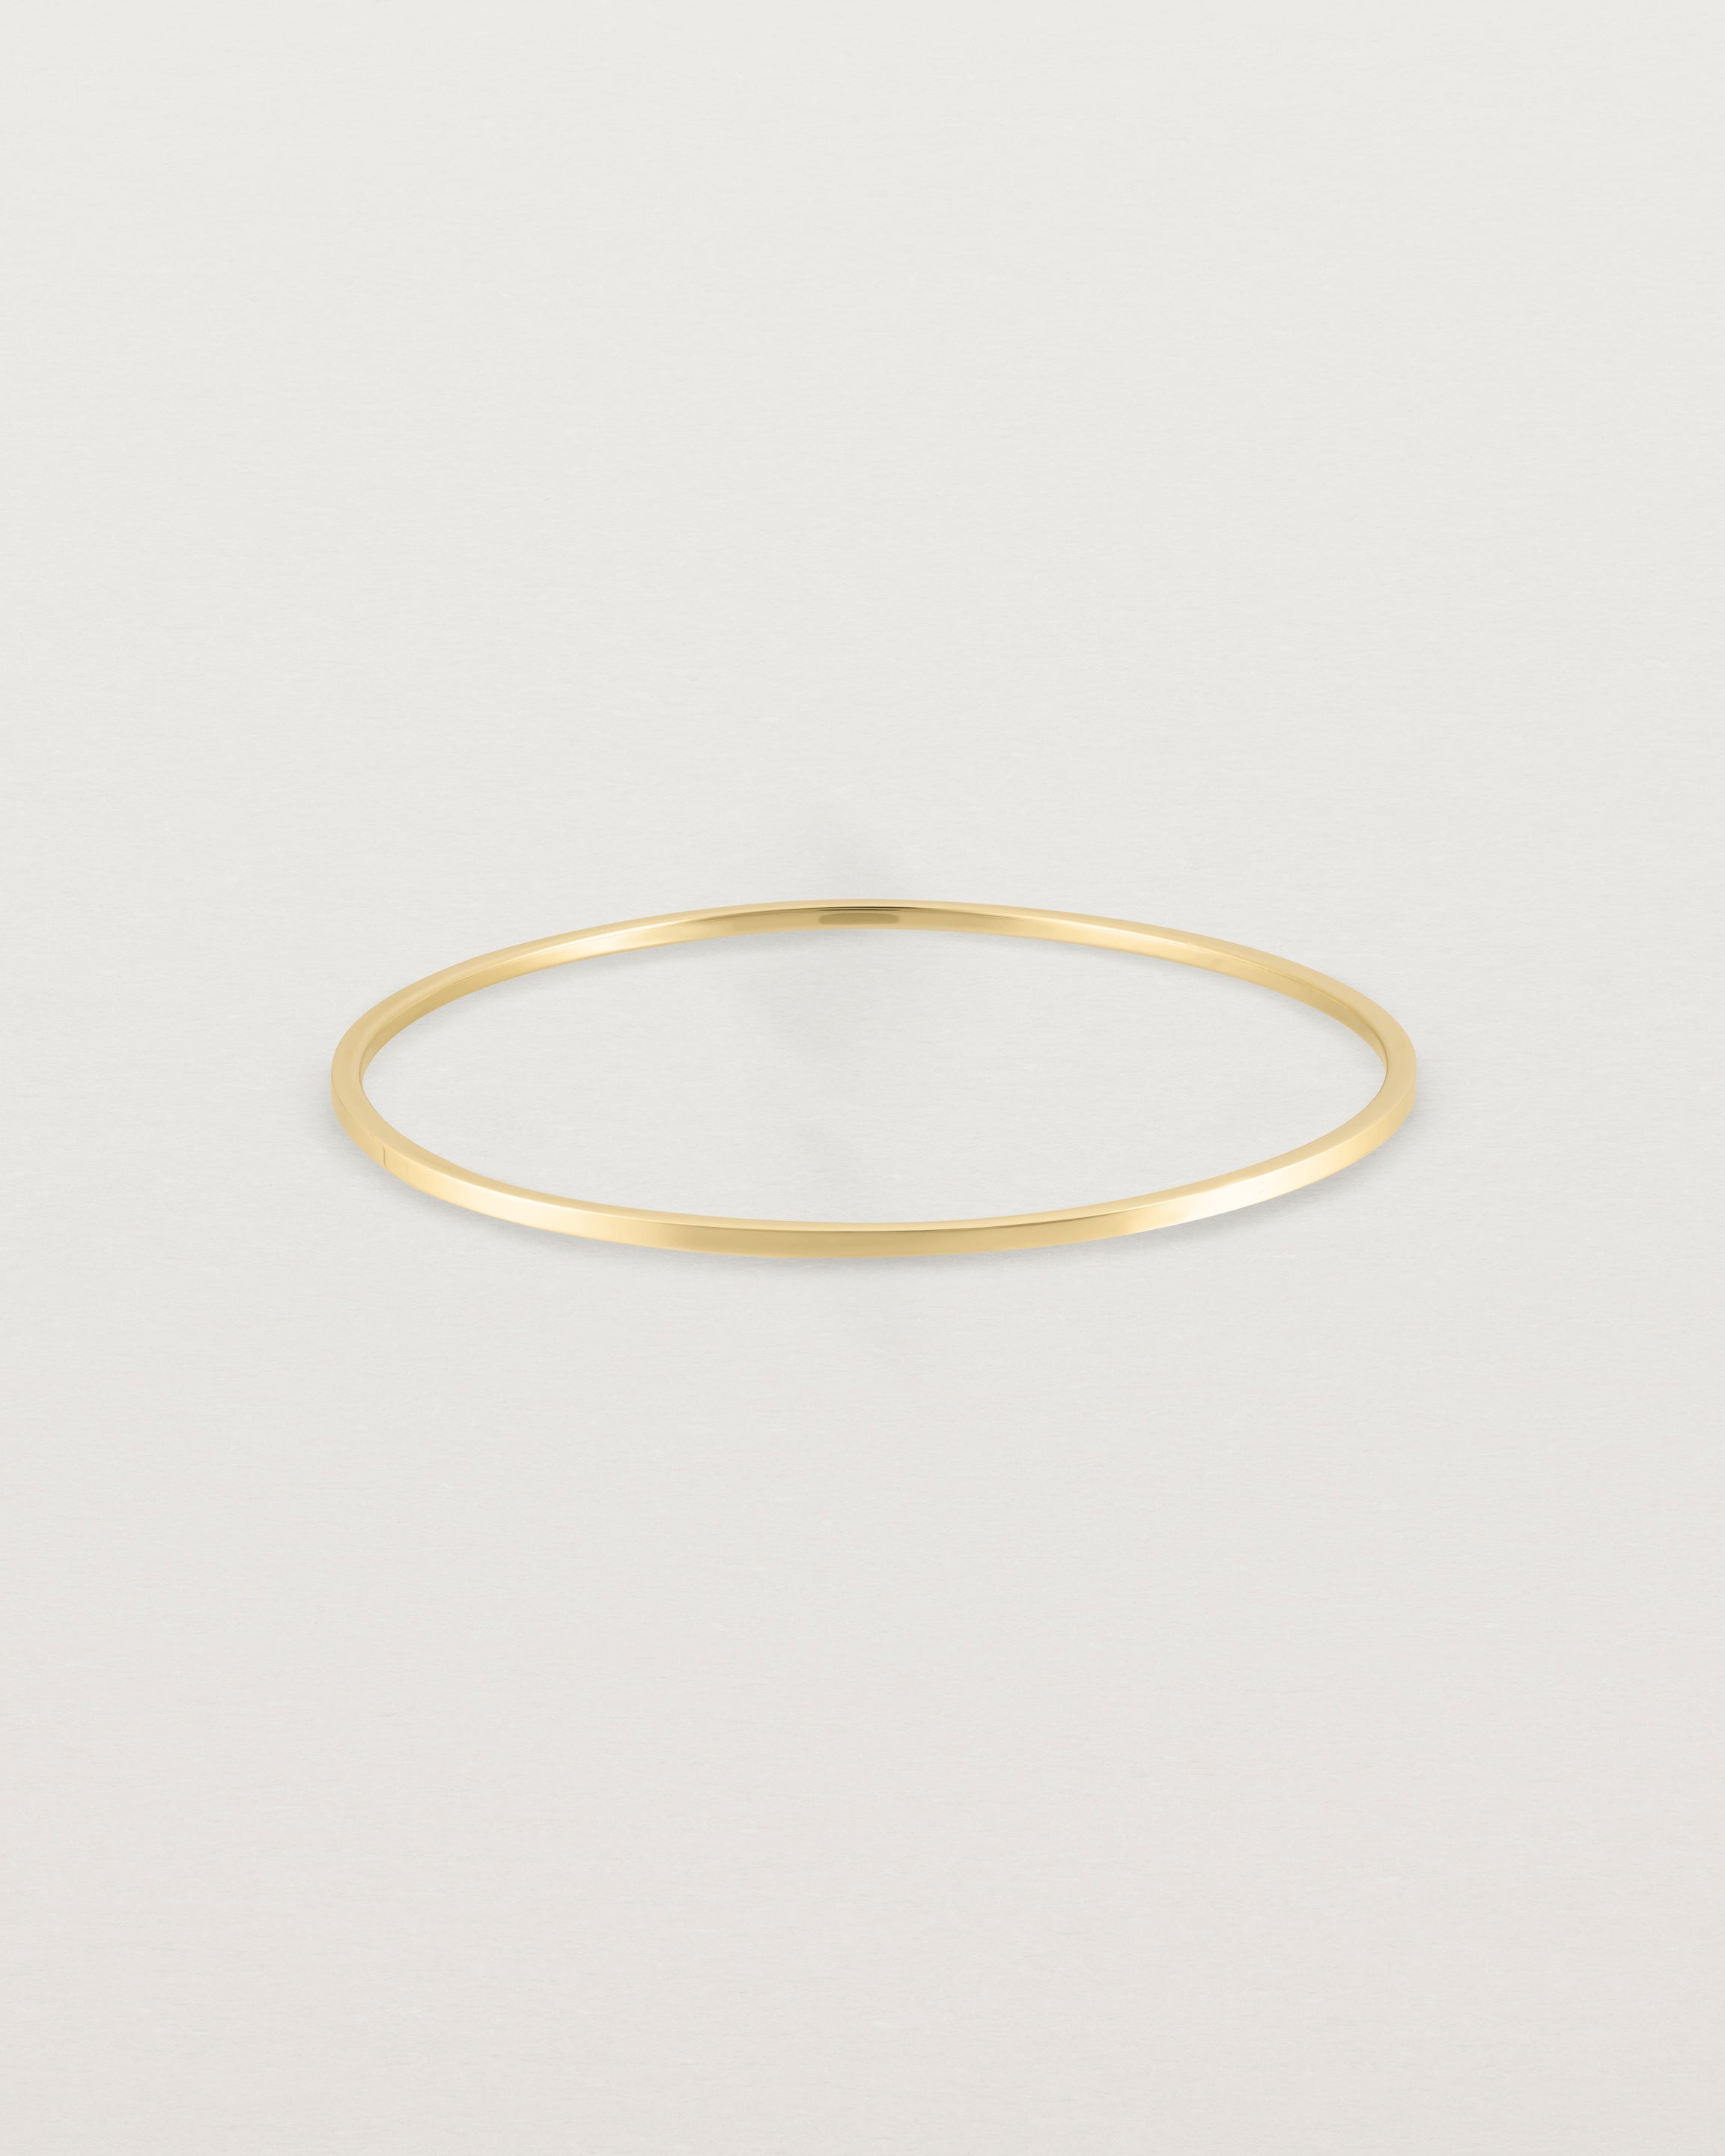 Front view of the Antares Bangle in Yellow Gold.